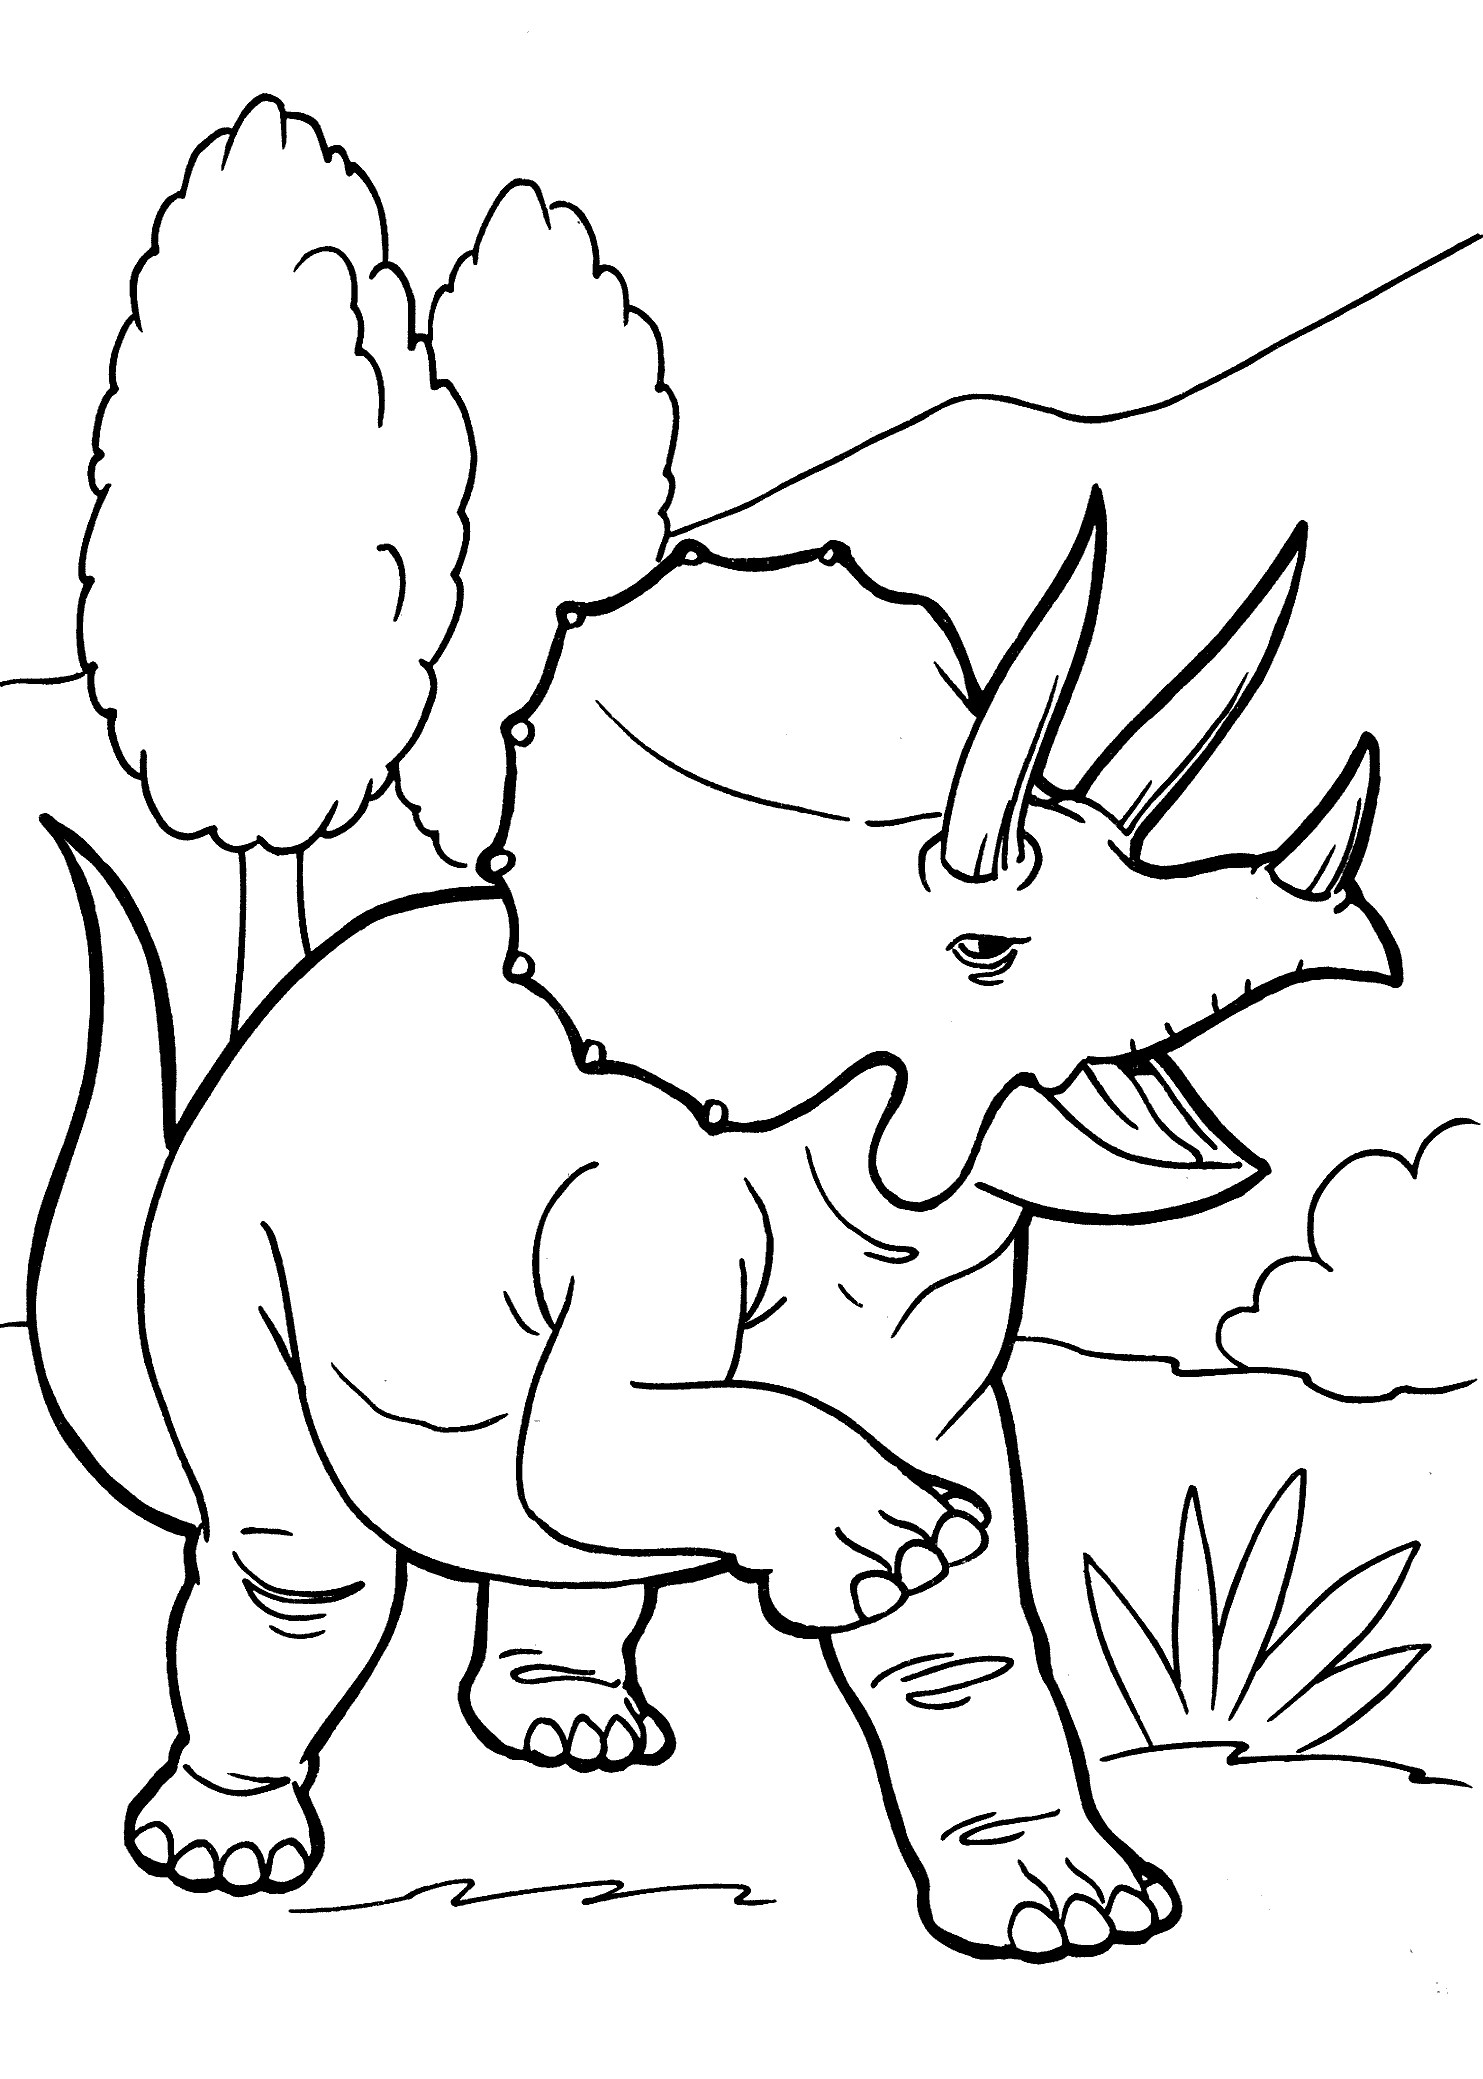 triceratops pictures to color angry triceratops dinosaur coloring pages for kids color to triceratops pictures 